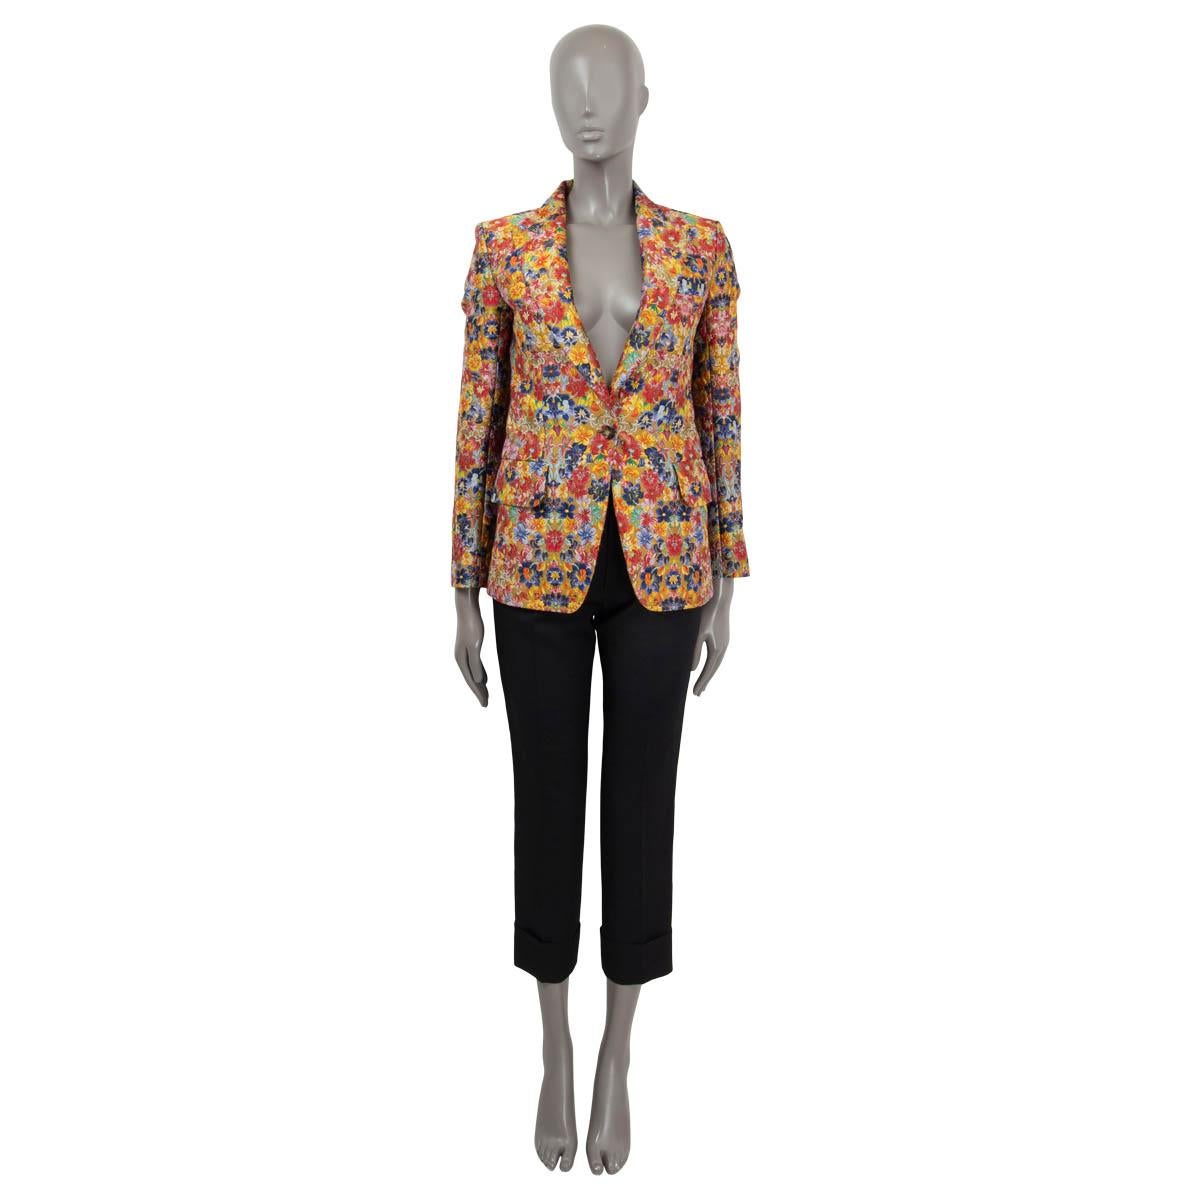 100% authentic Cèline by Pheobe Philo single-button blazer in mustard polyester (89%), silk (9%) and polyamide (2%). Features buttoned cuffs, flap pockets and a chest pocket on the front. Opens with one button on the front. Shoulders lined in black